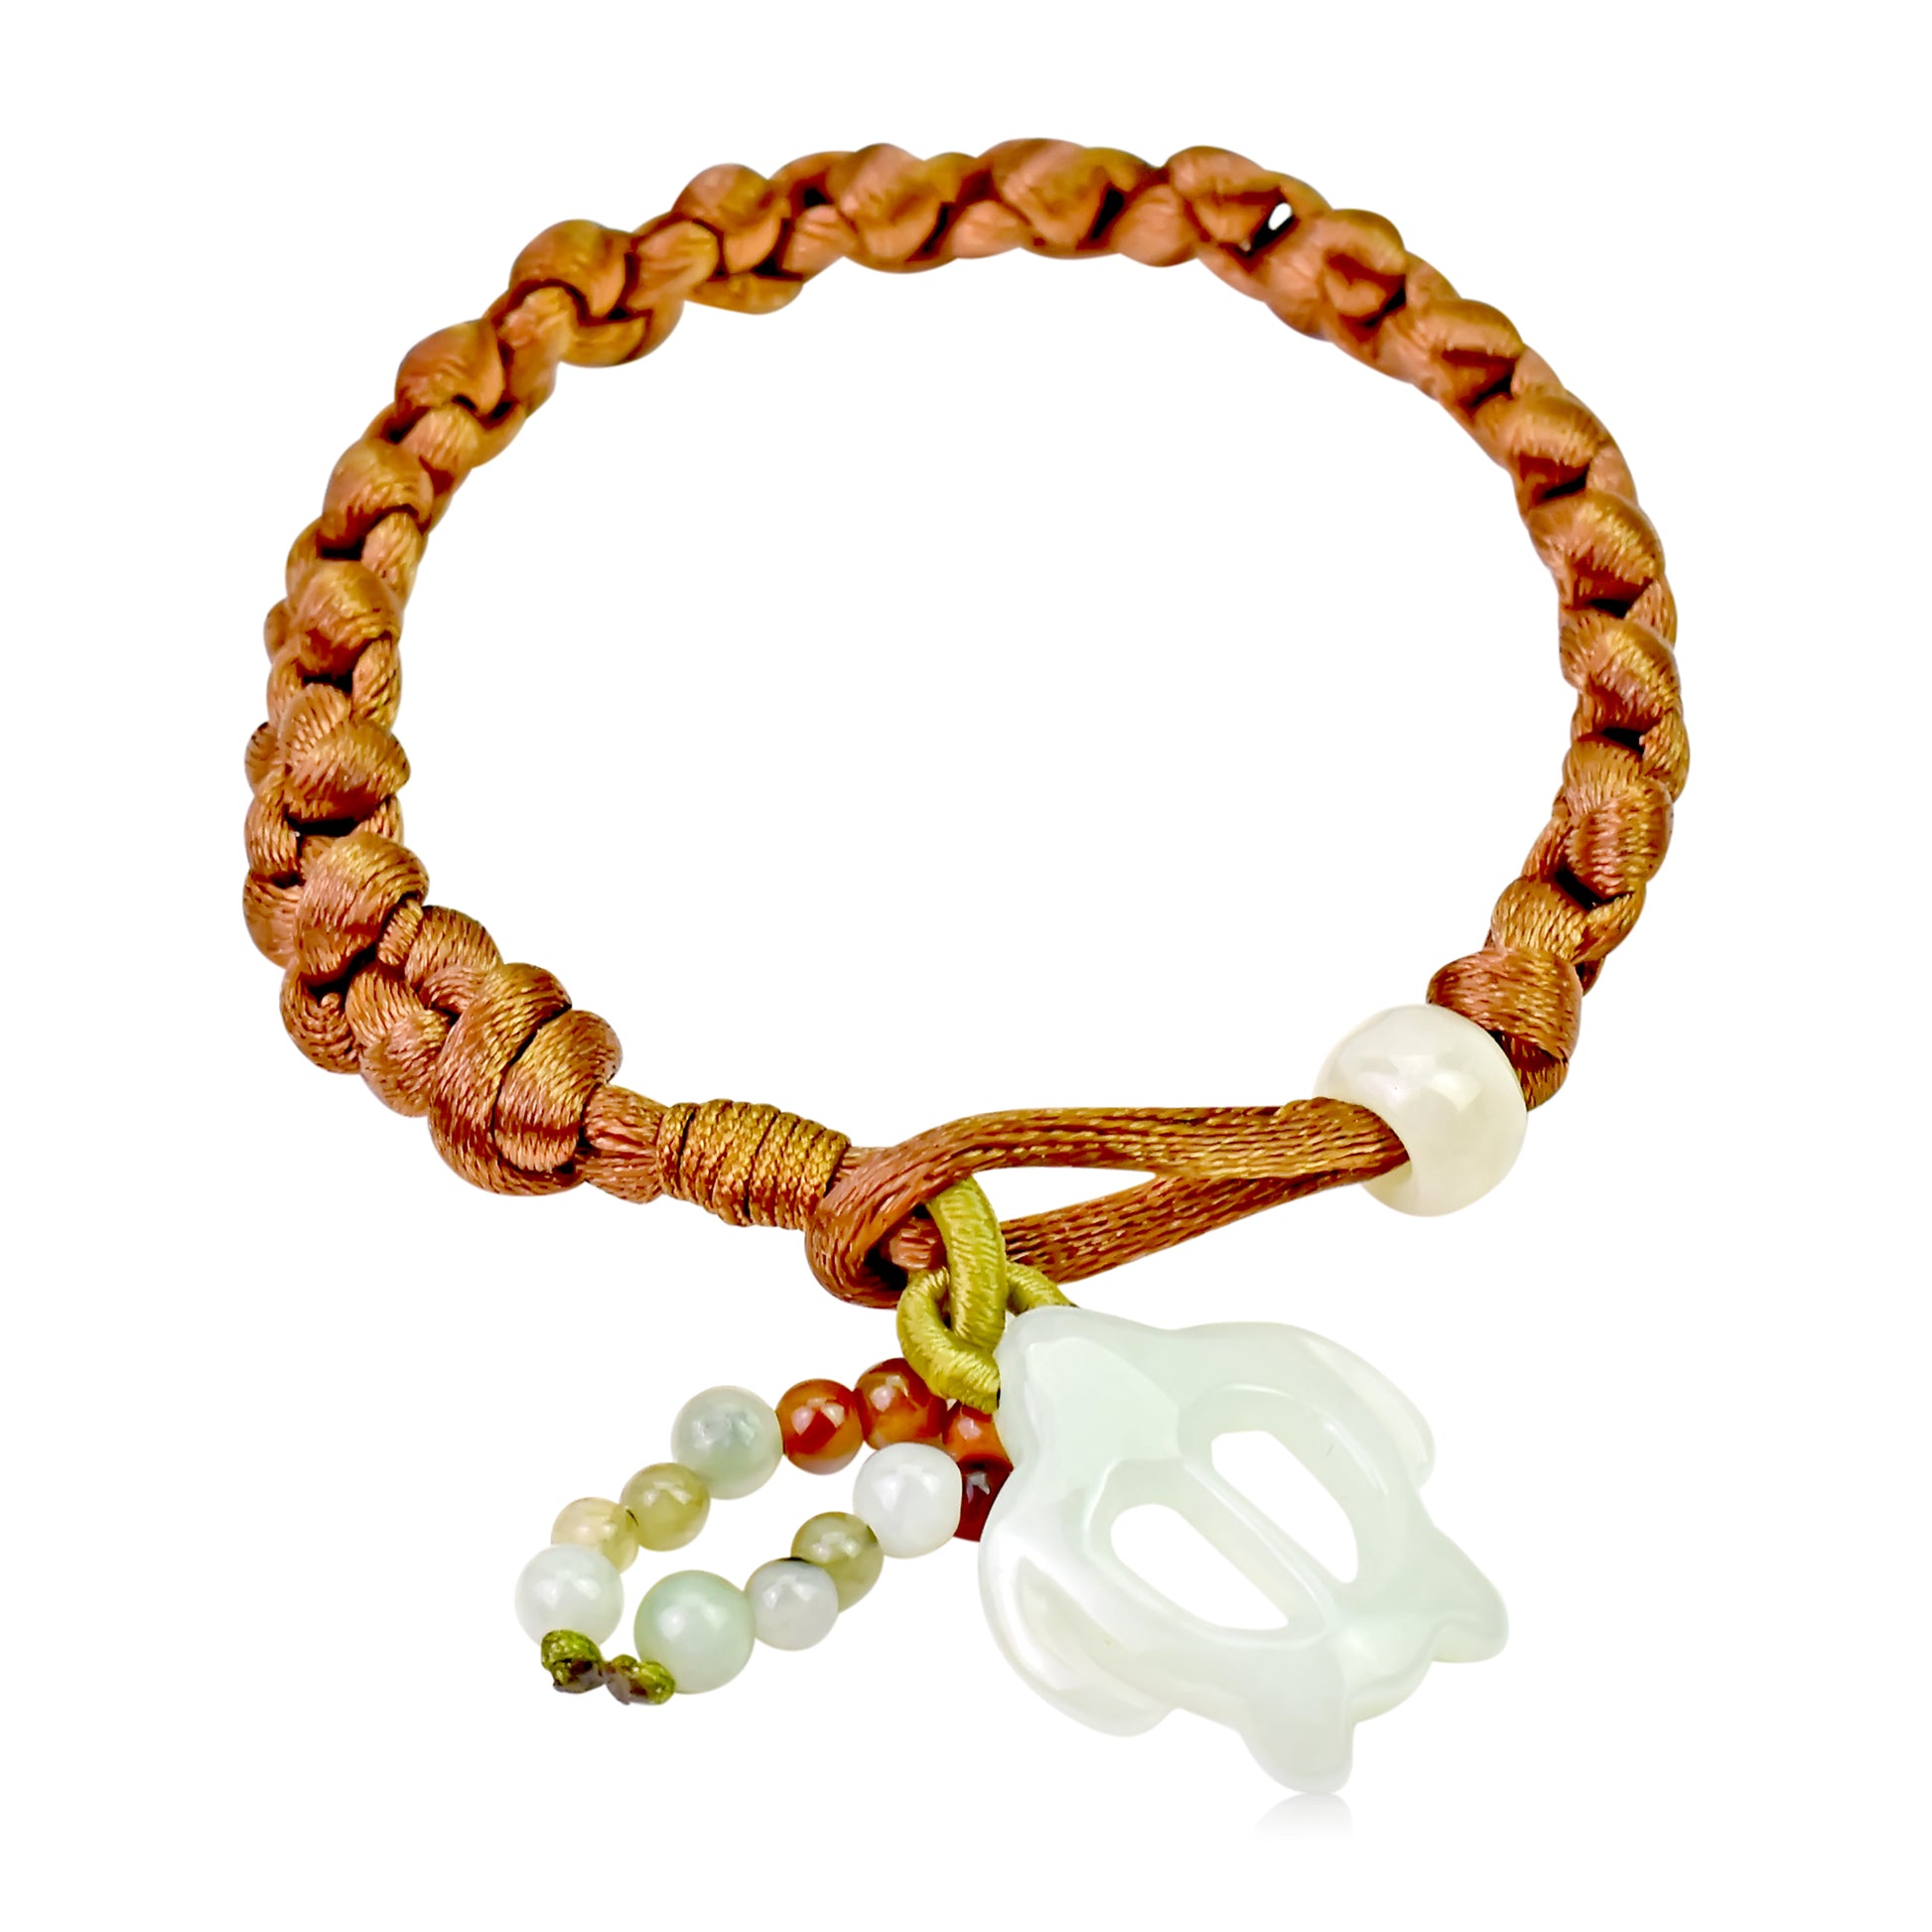 Look and Feel Calm and Protected with the Turtle Jade Bracelet made with Brown Cord